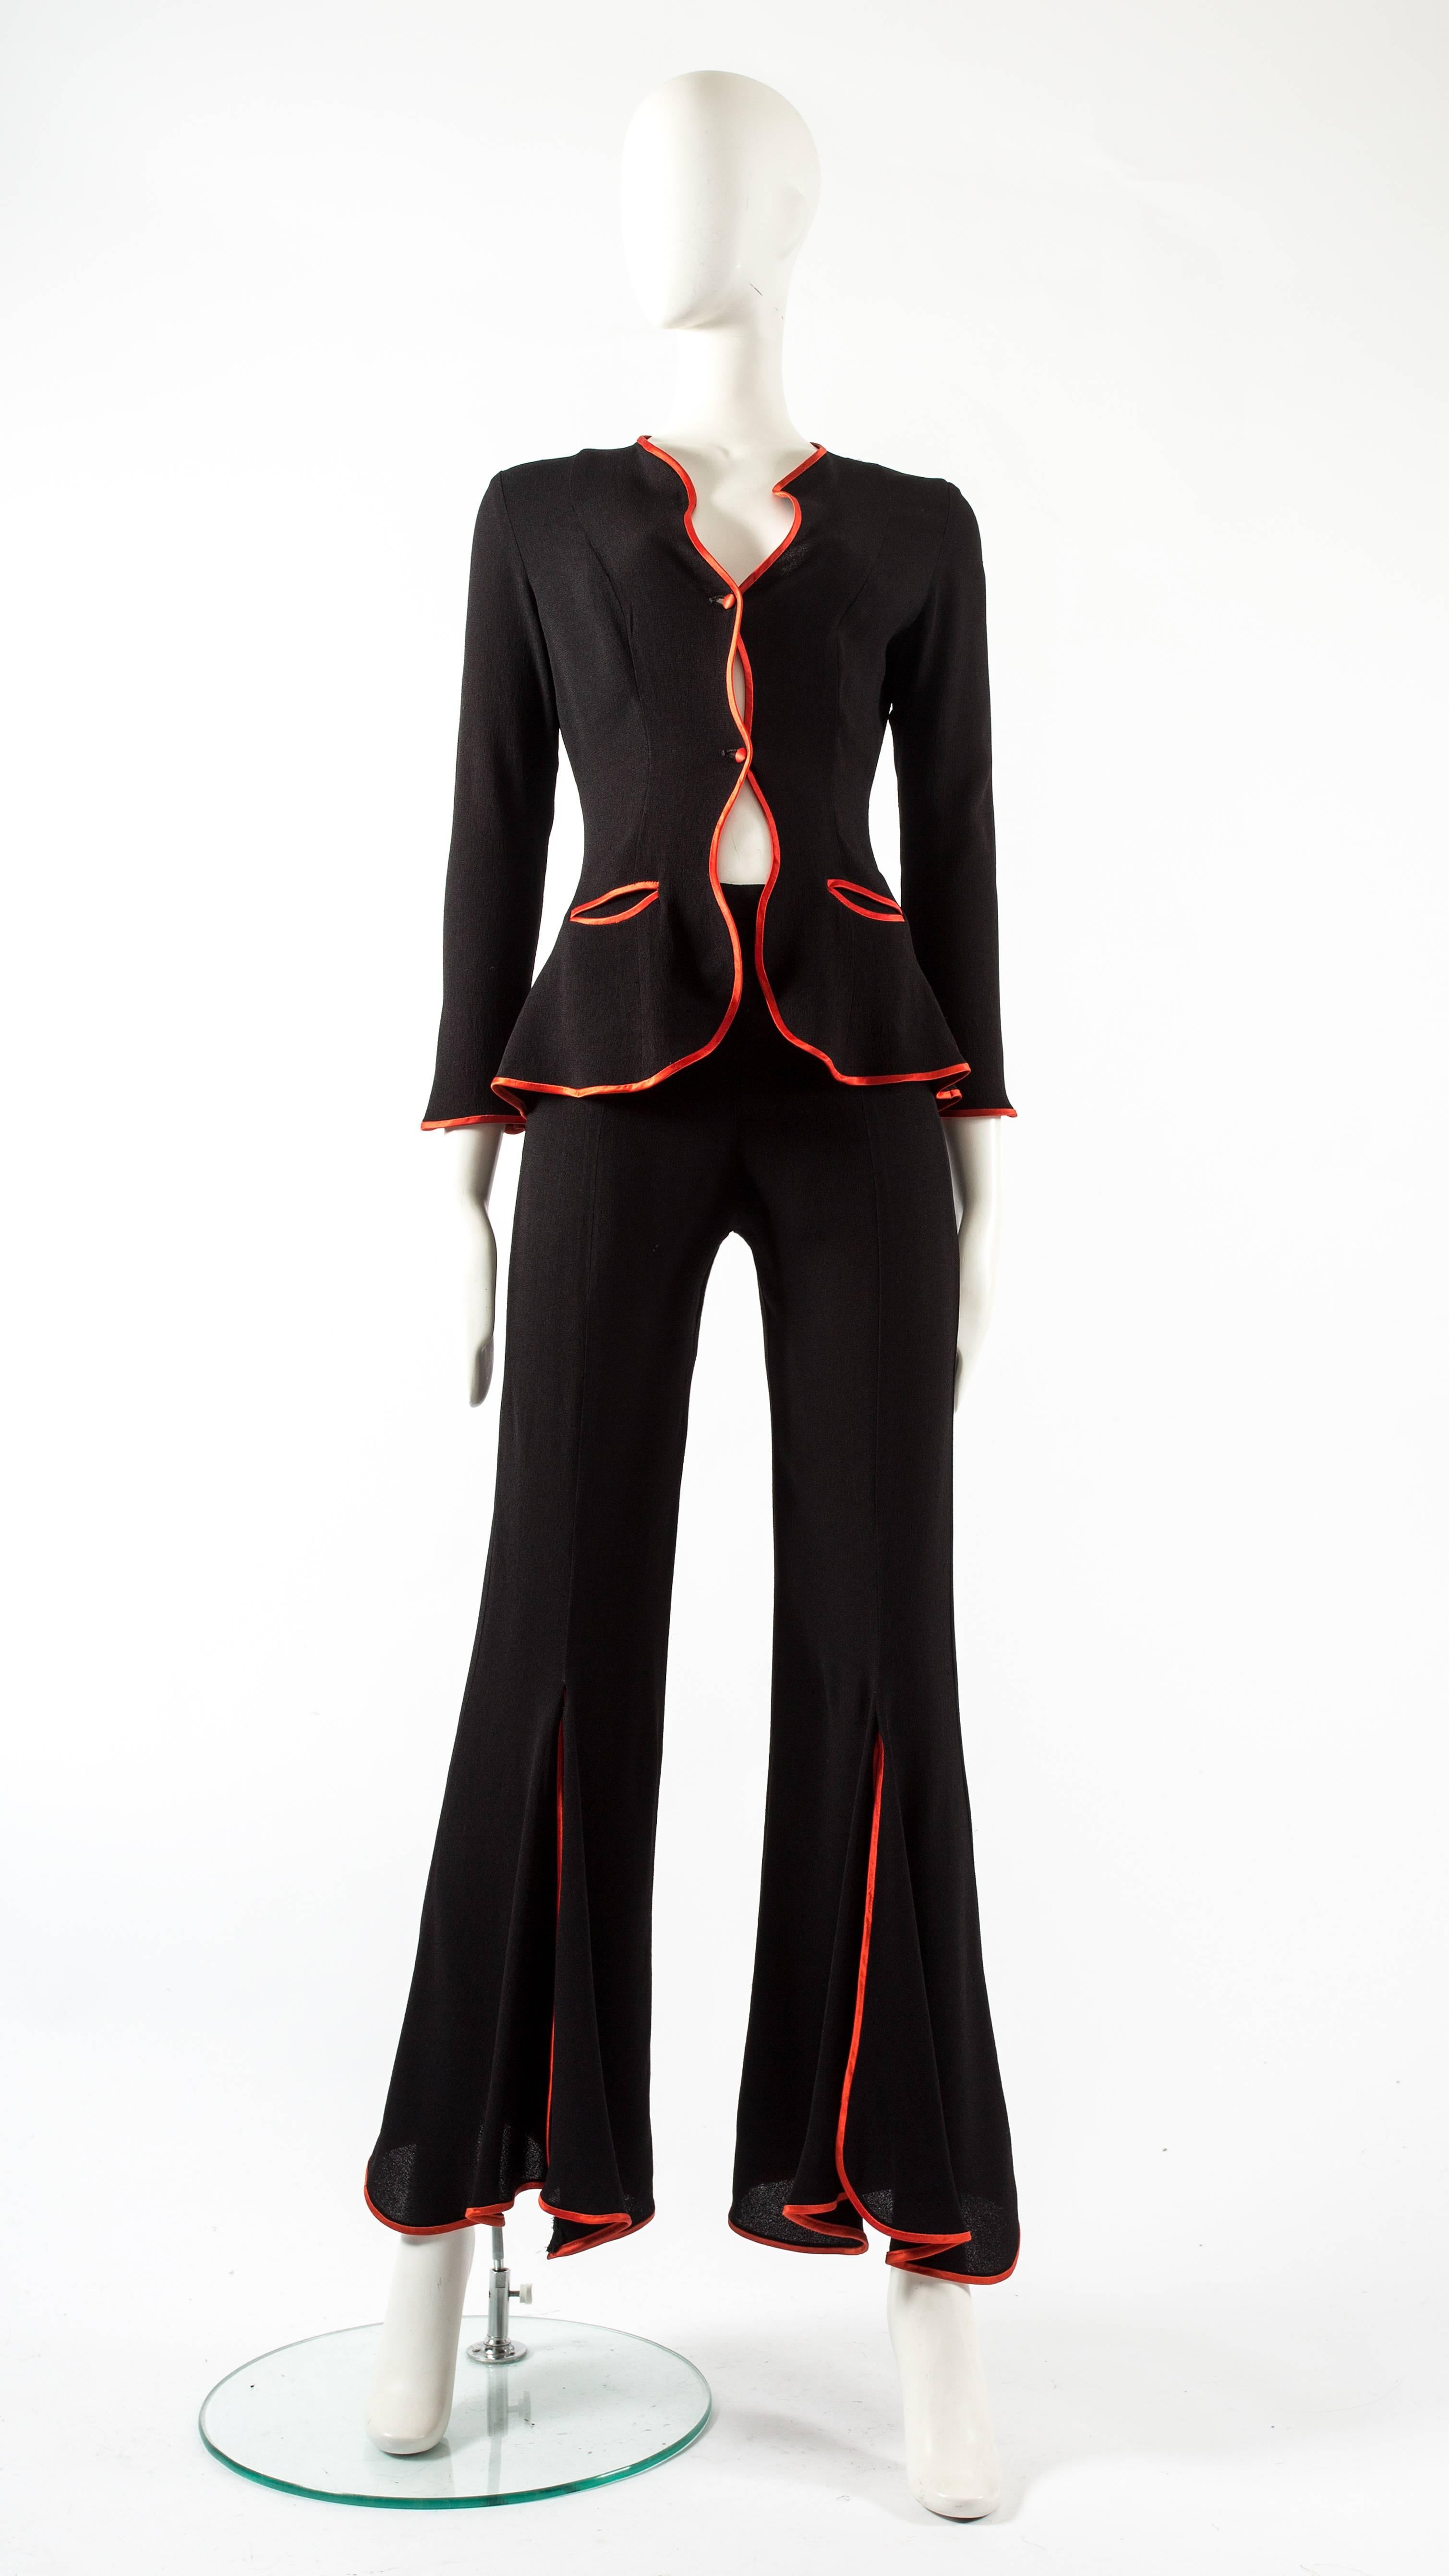 Ossie Clark 1970 black moss crepe 'Judy' trouser suit, with undulating borders piped in red satin.